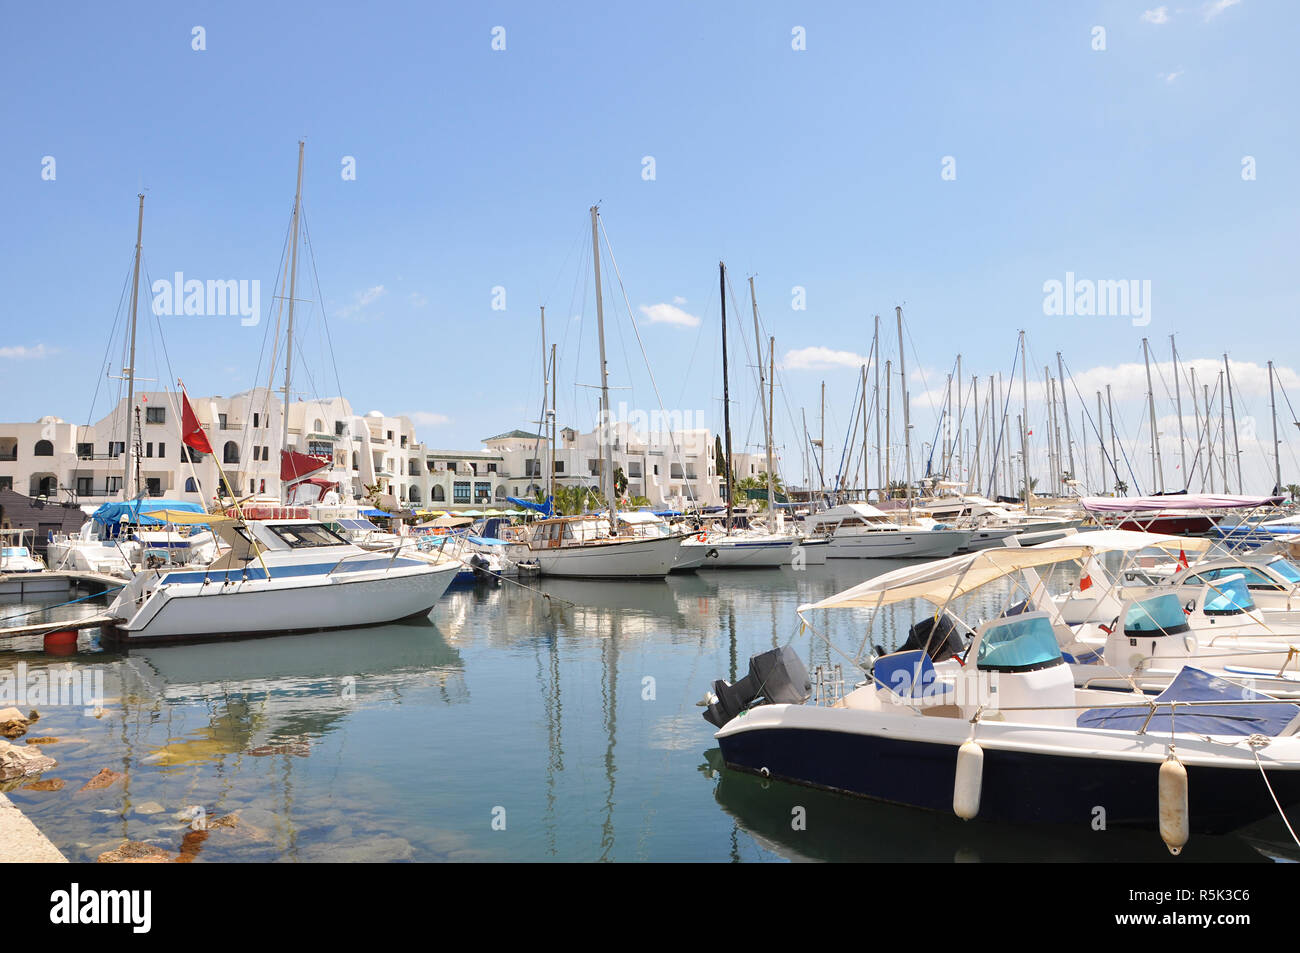 Several yachts in popular touristic destination in Northern Africa - Port El Kantaoui, sunny day. Stock Photo